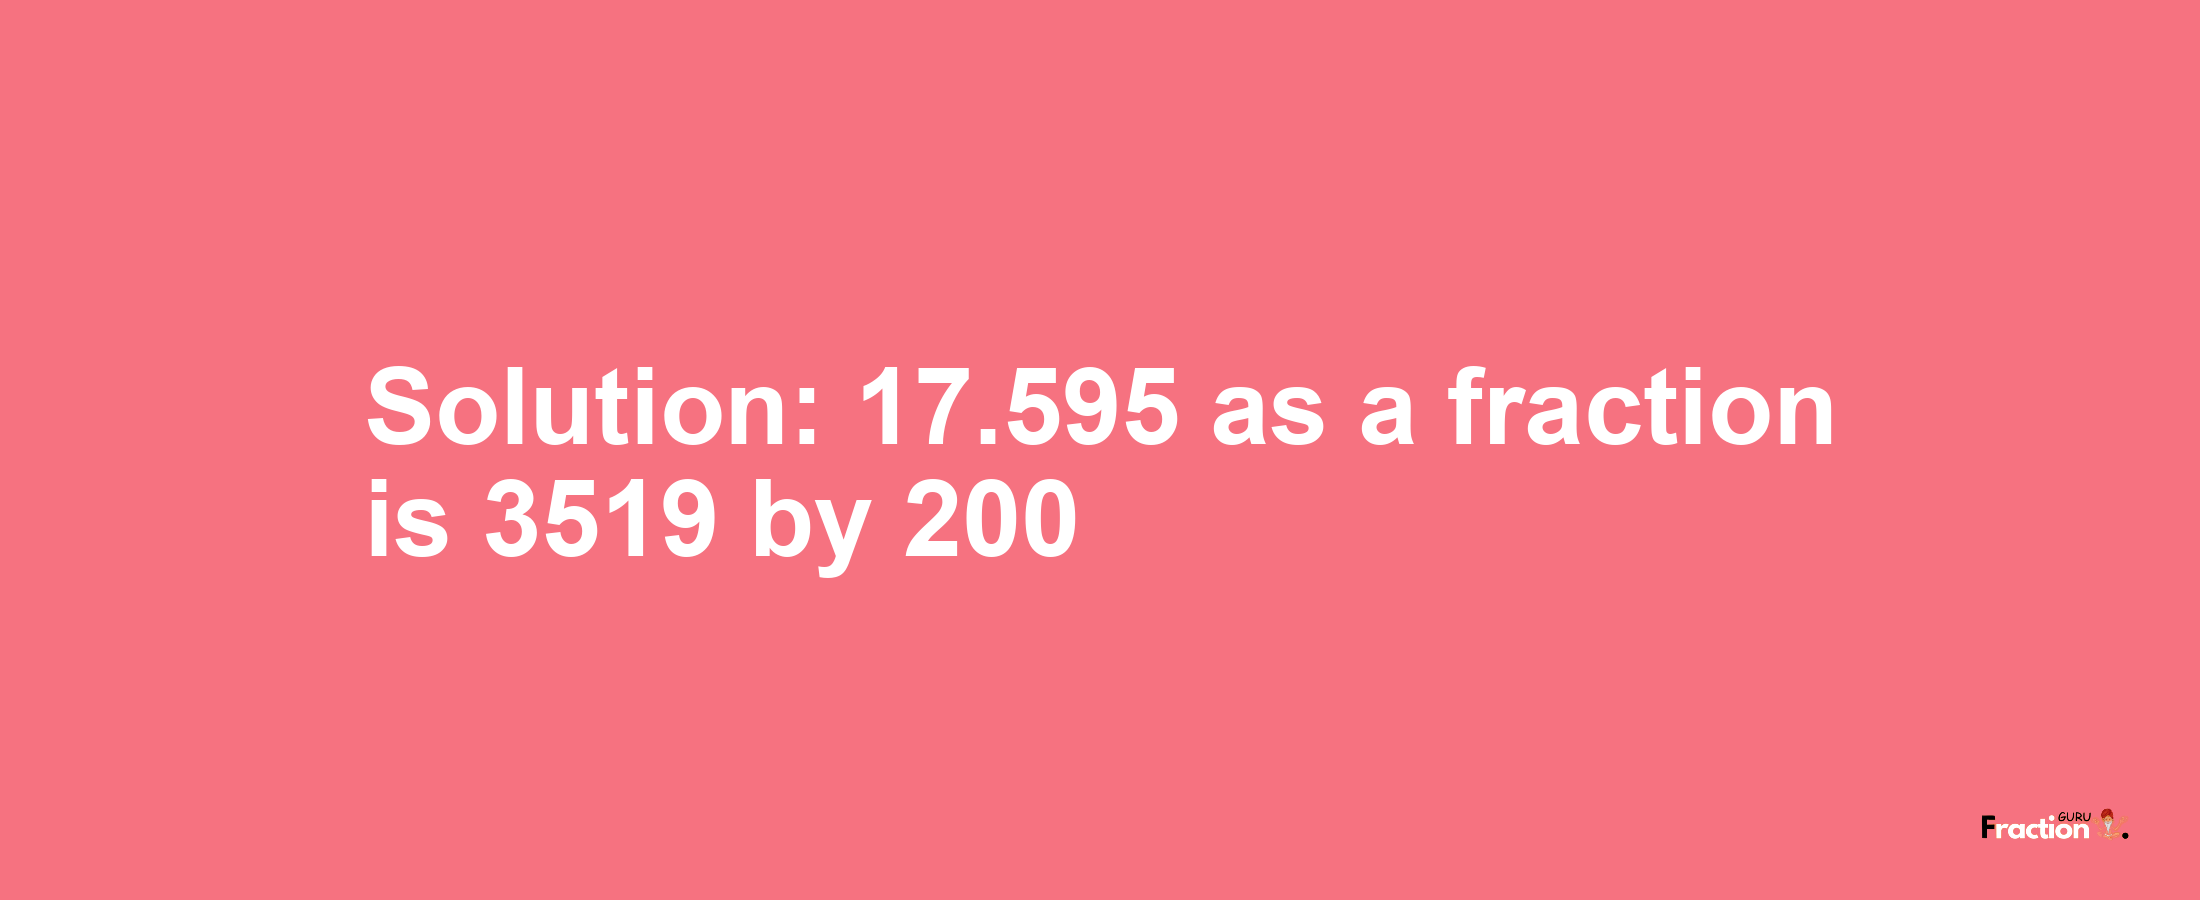 Solution:17.595 as a fraction is 3519/200